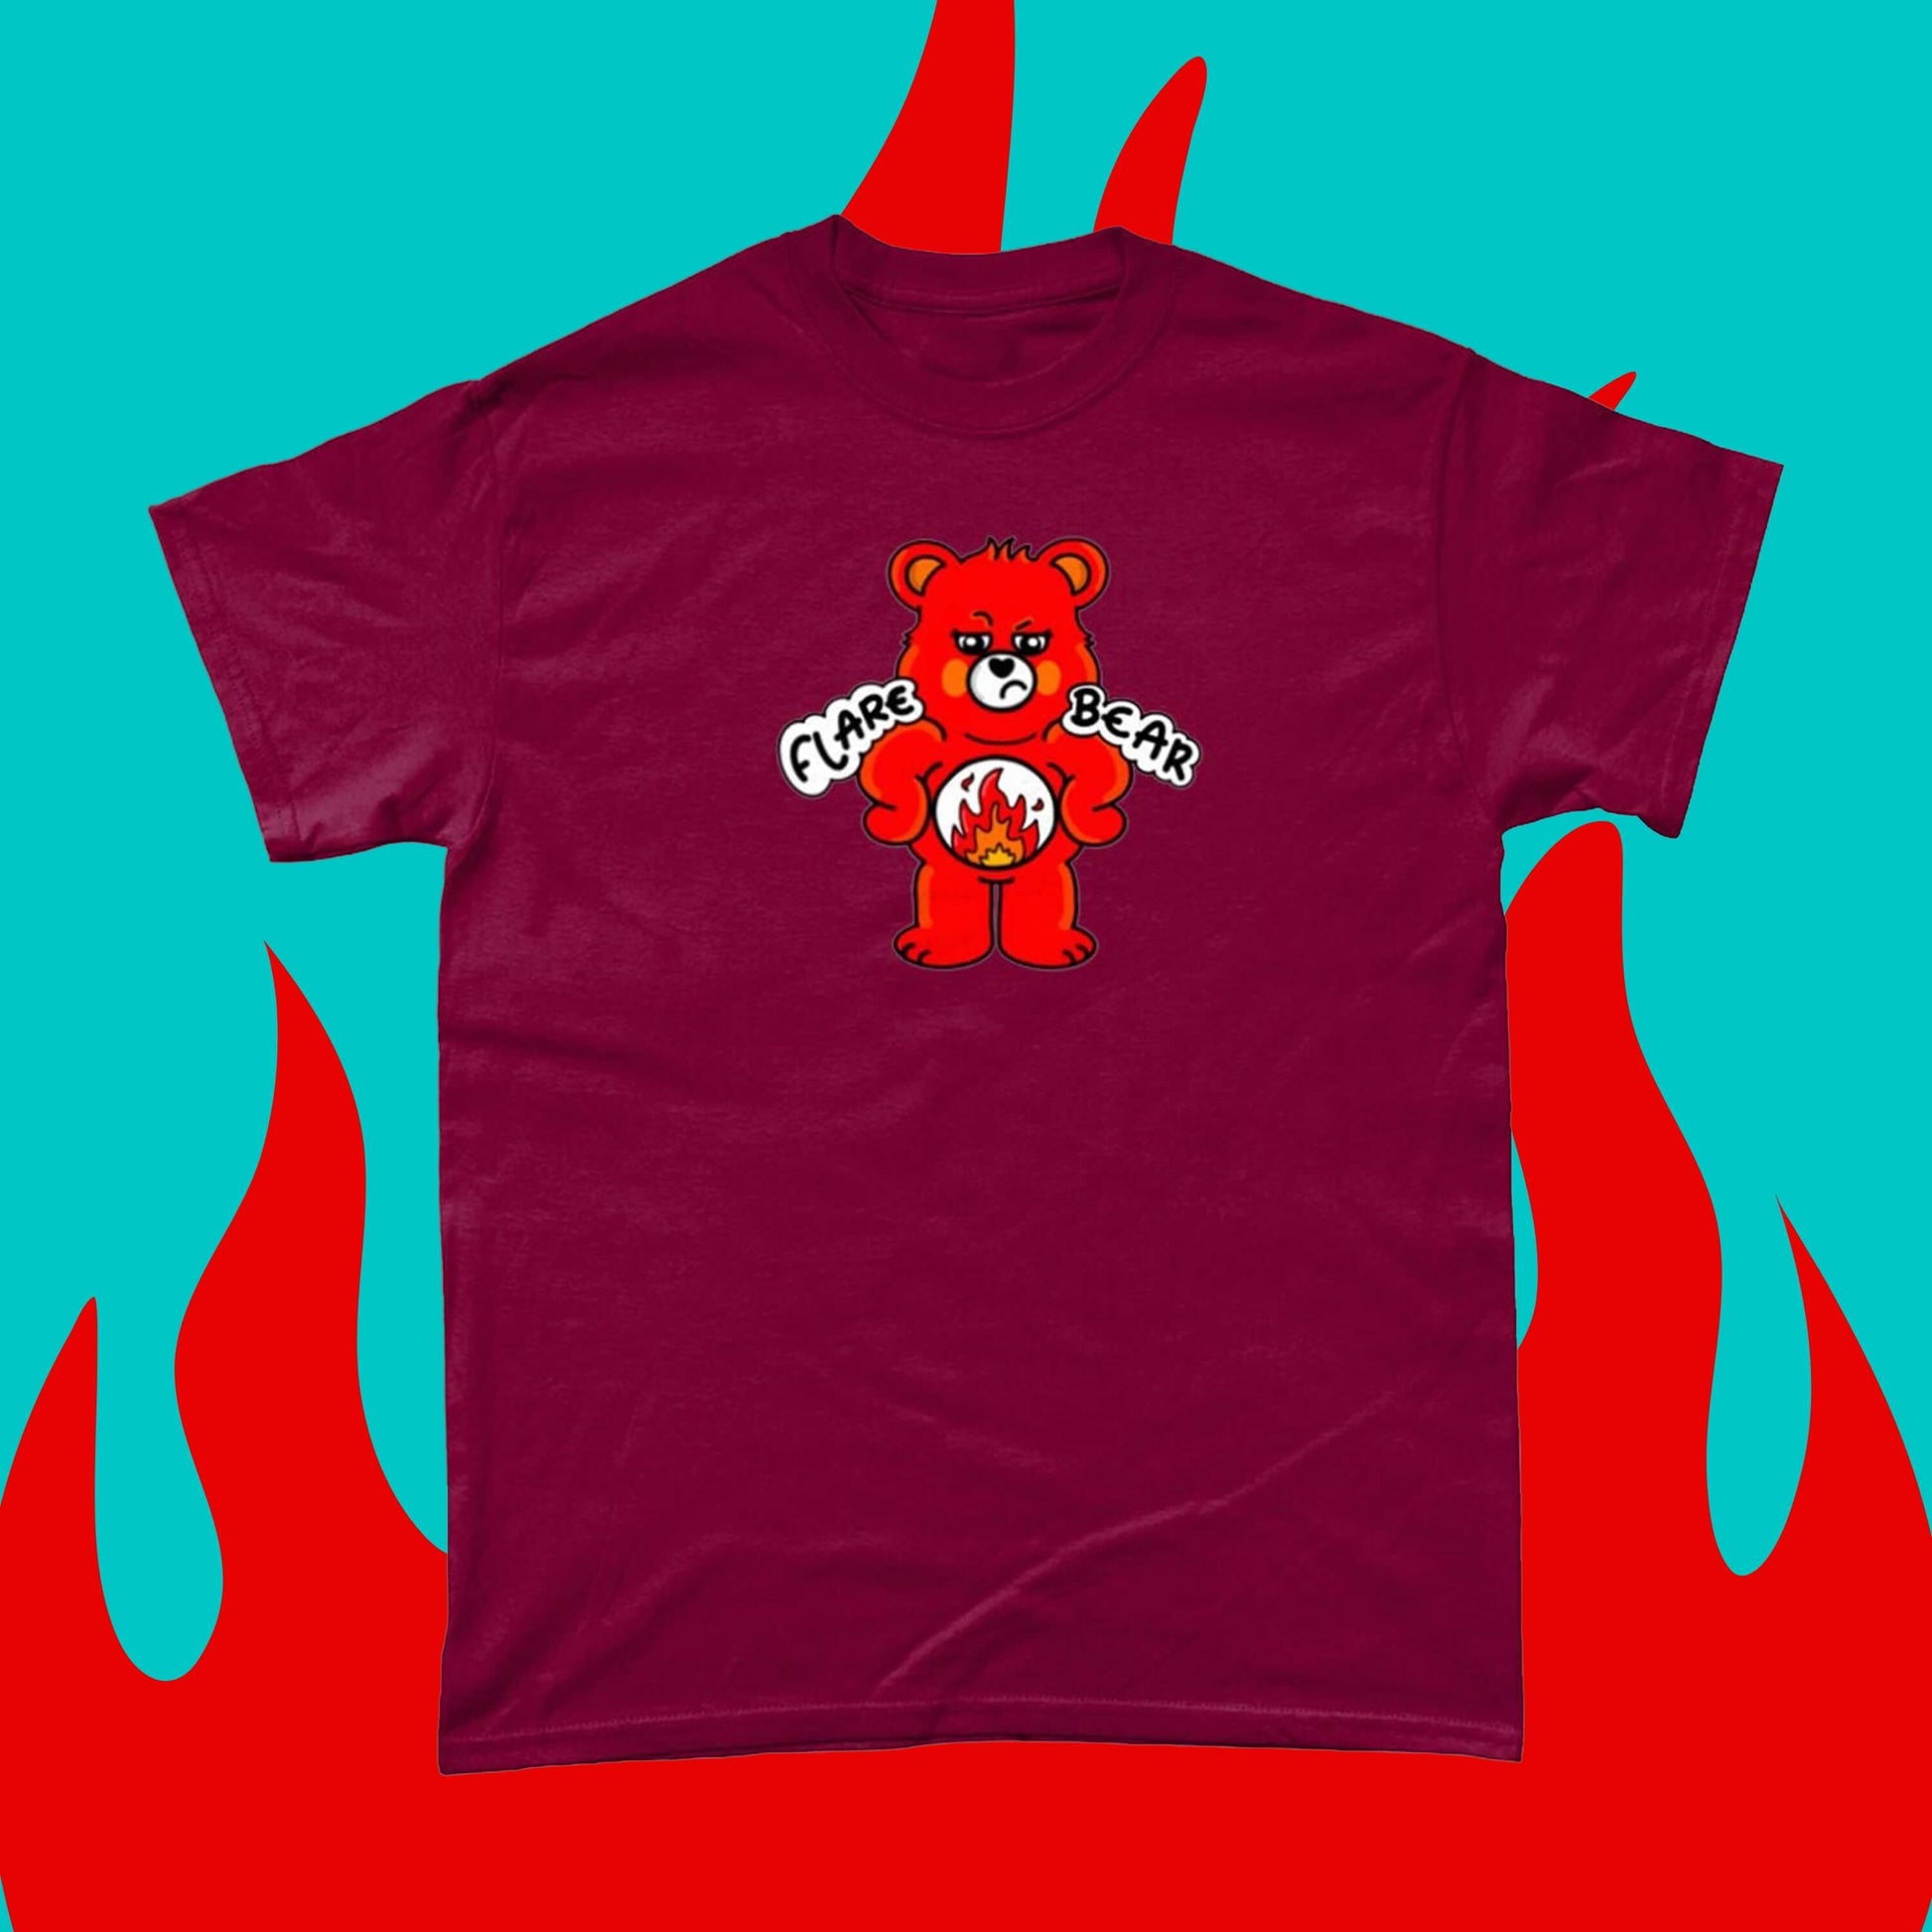 Flare Bear T-shirt on a blue and red flame background. The cardinal red short sleeve tshirt is of a red bear with a fed up expression and hands on its hips. There is a white circle on its belly with flames inside. Flare Bear is written on the middle. The tshirt is designed to raise awareness for chronic illness flare ups.